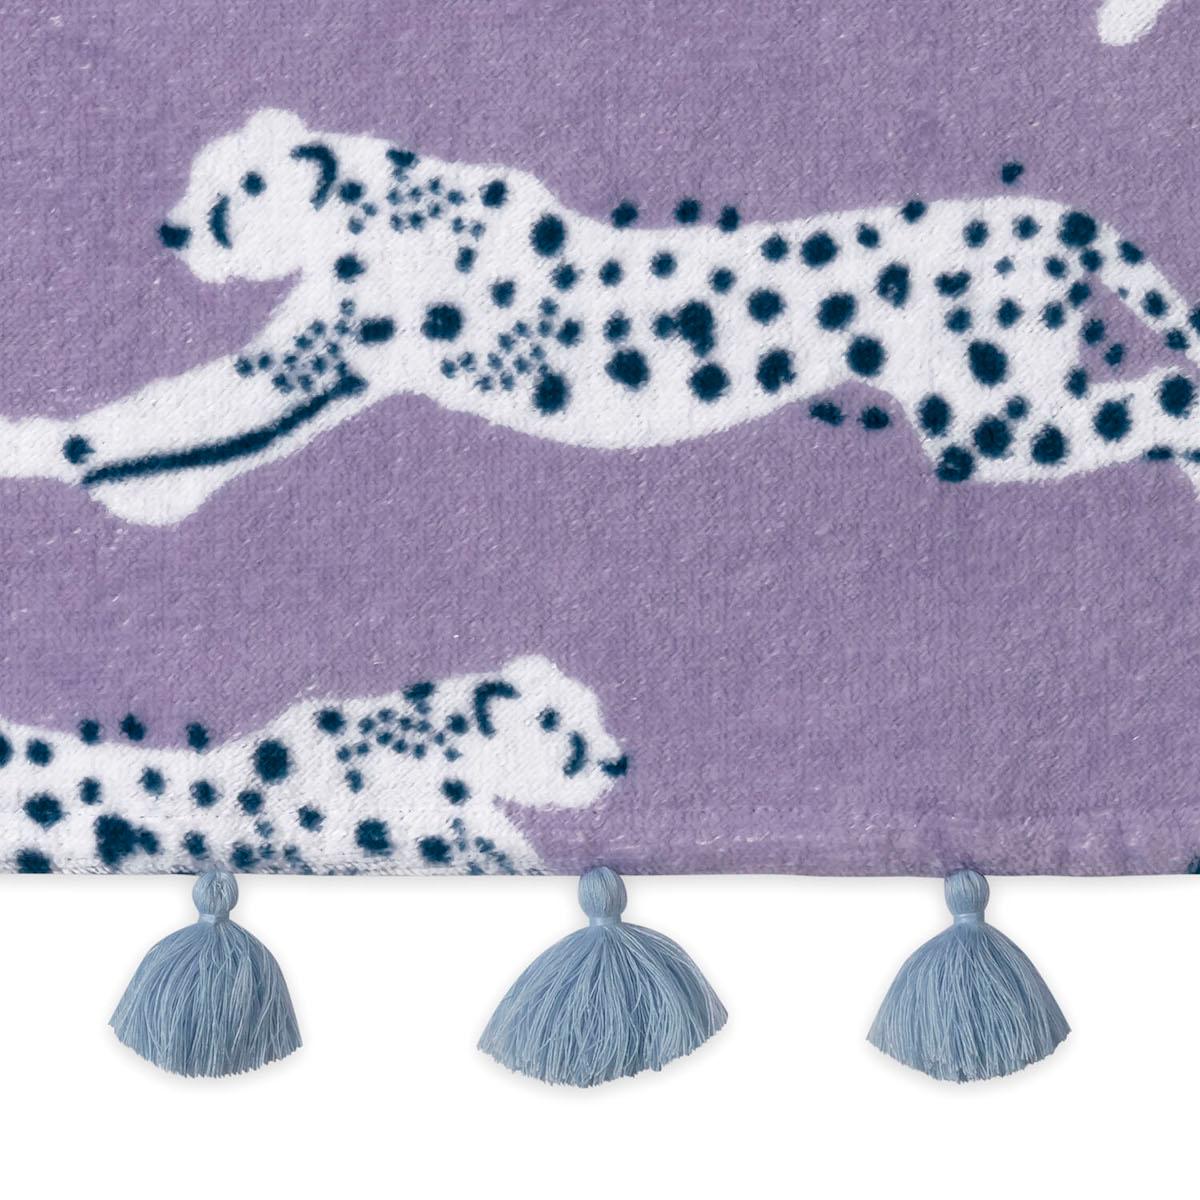 Leaping Leopard Beach Towel_Lilac